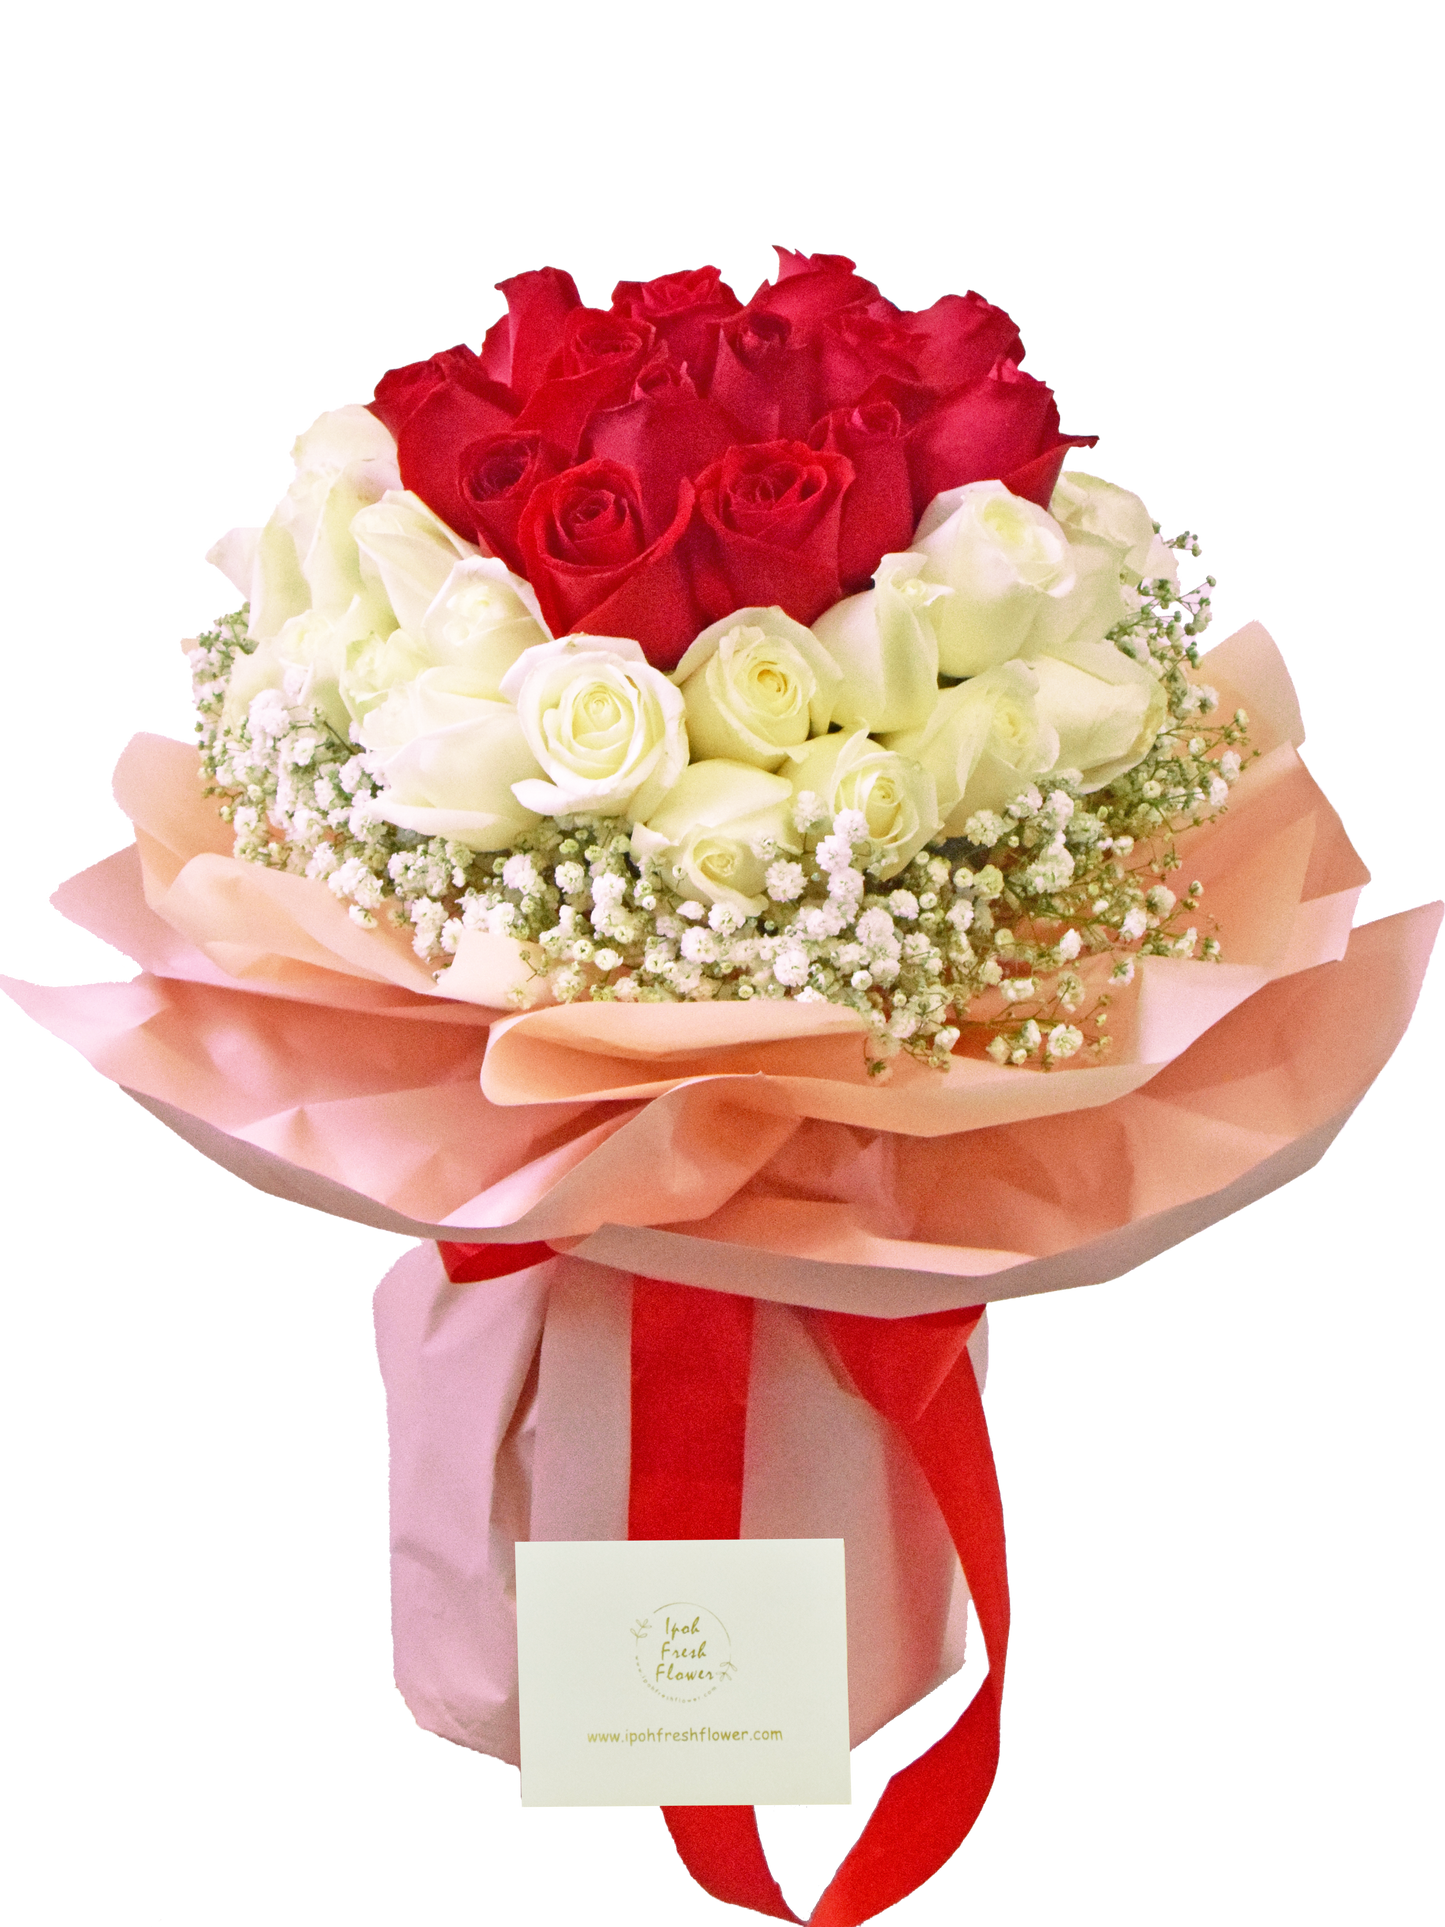 Just For You- 50 Roses| Fresh Flower Delivery